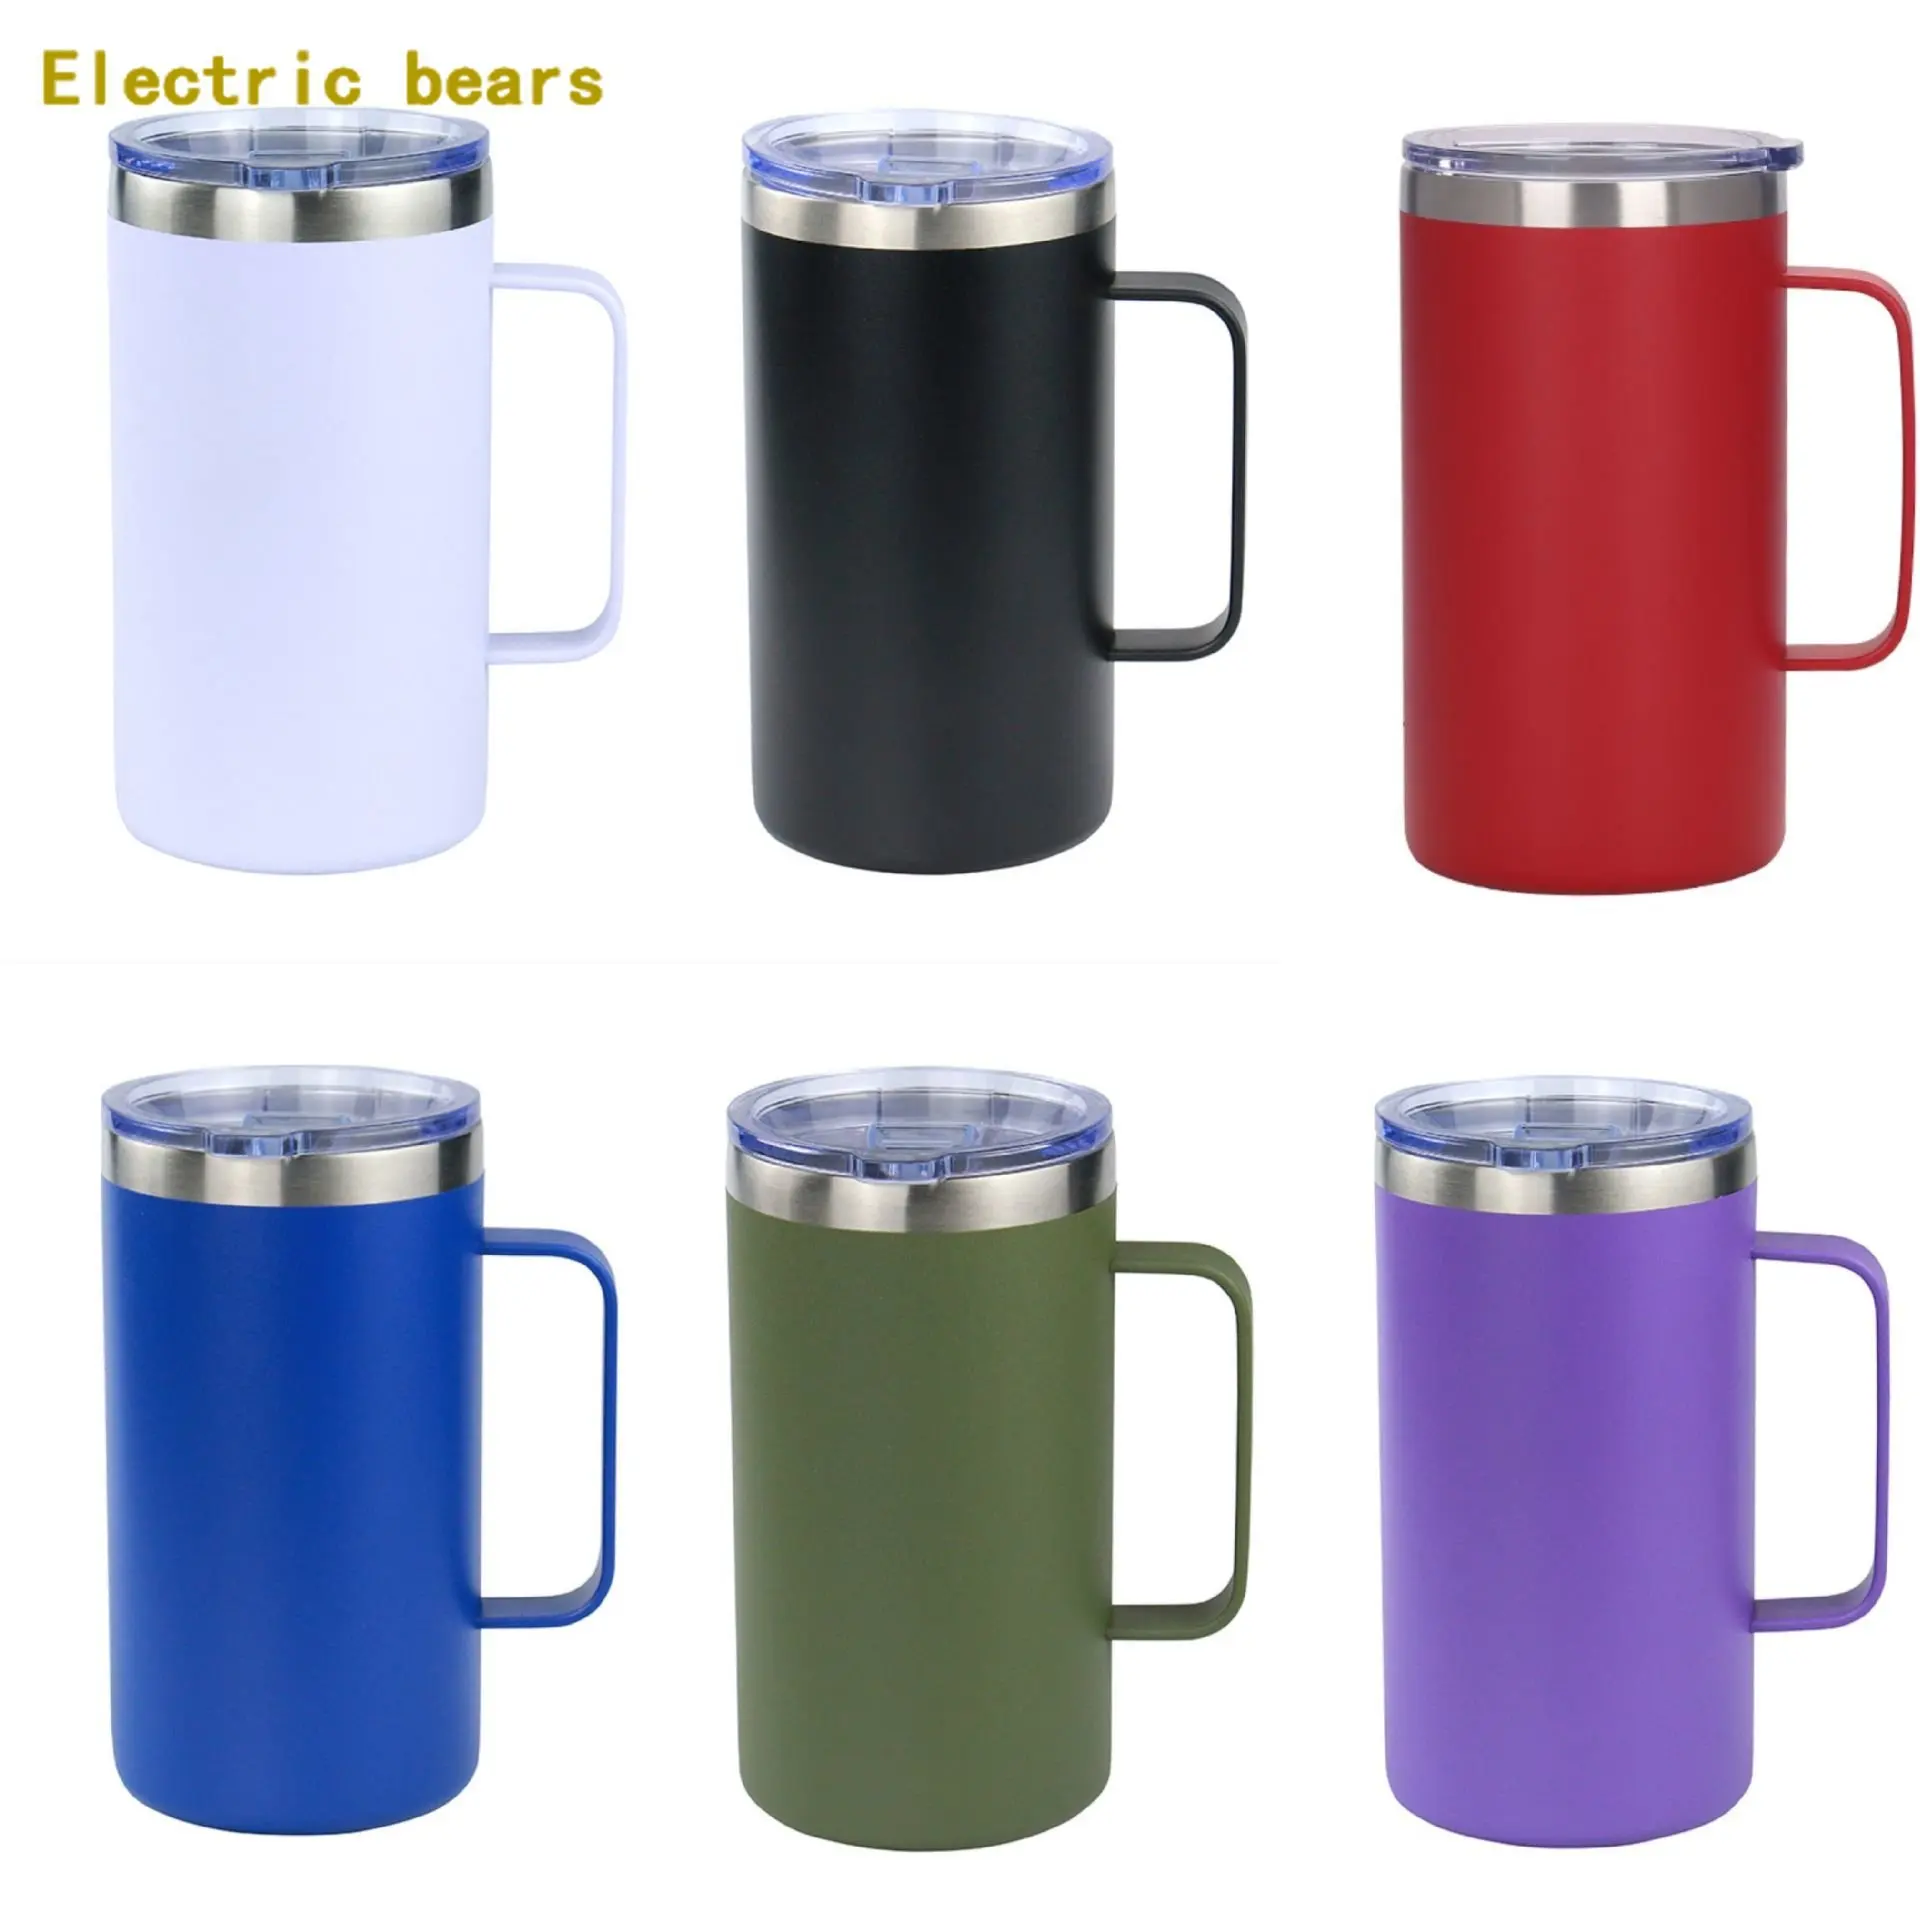 

24oz Stainless Steel tumbler Milk Cup Double Wall Vacuum Insulated Mugs Metal Wine Glass with handles coffee mug Gift